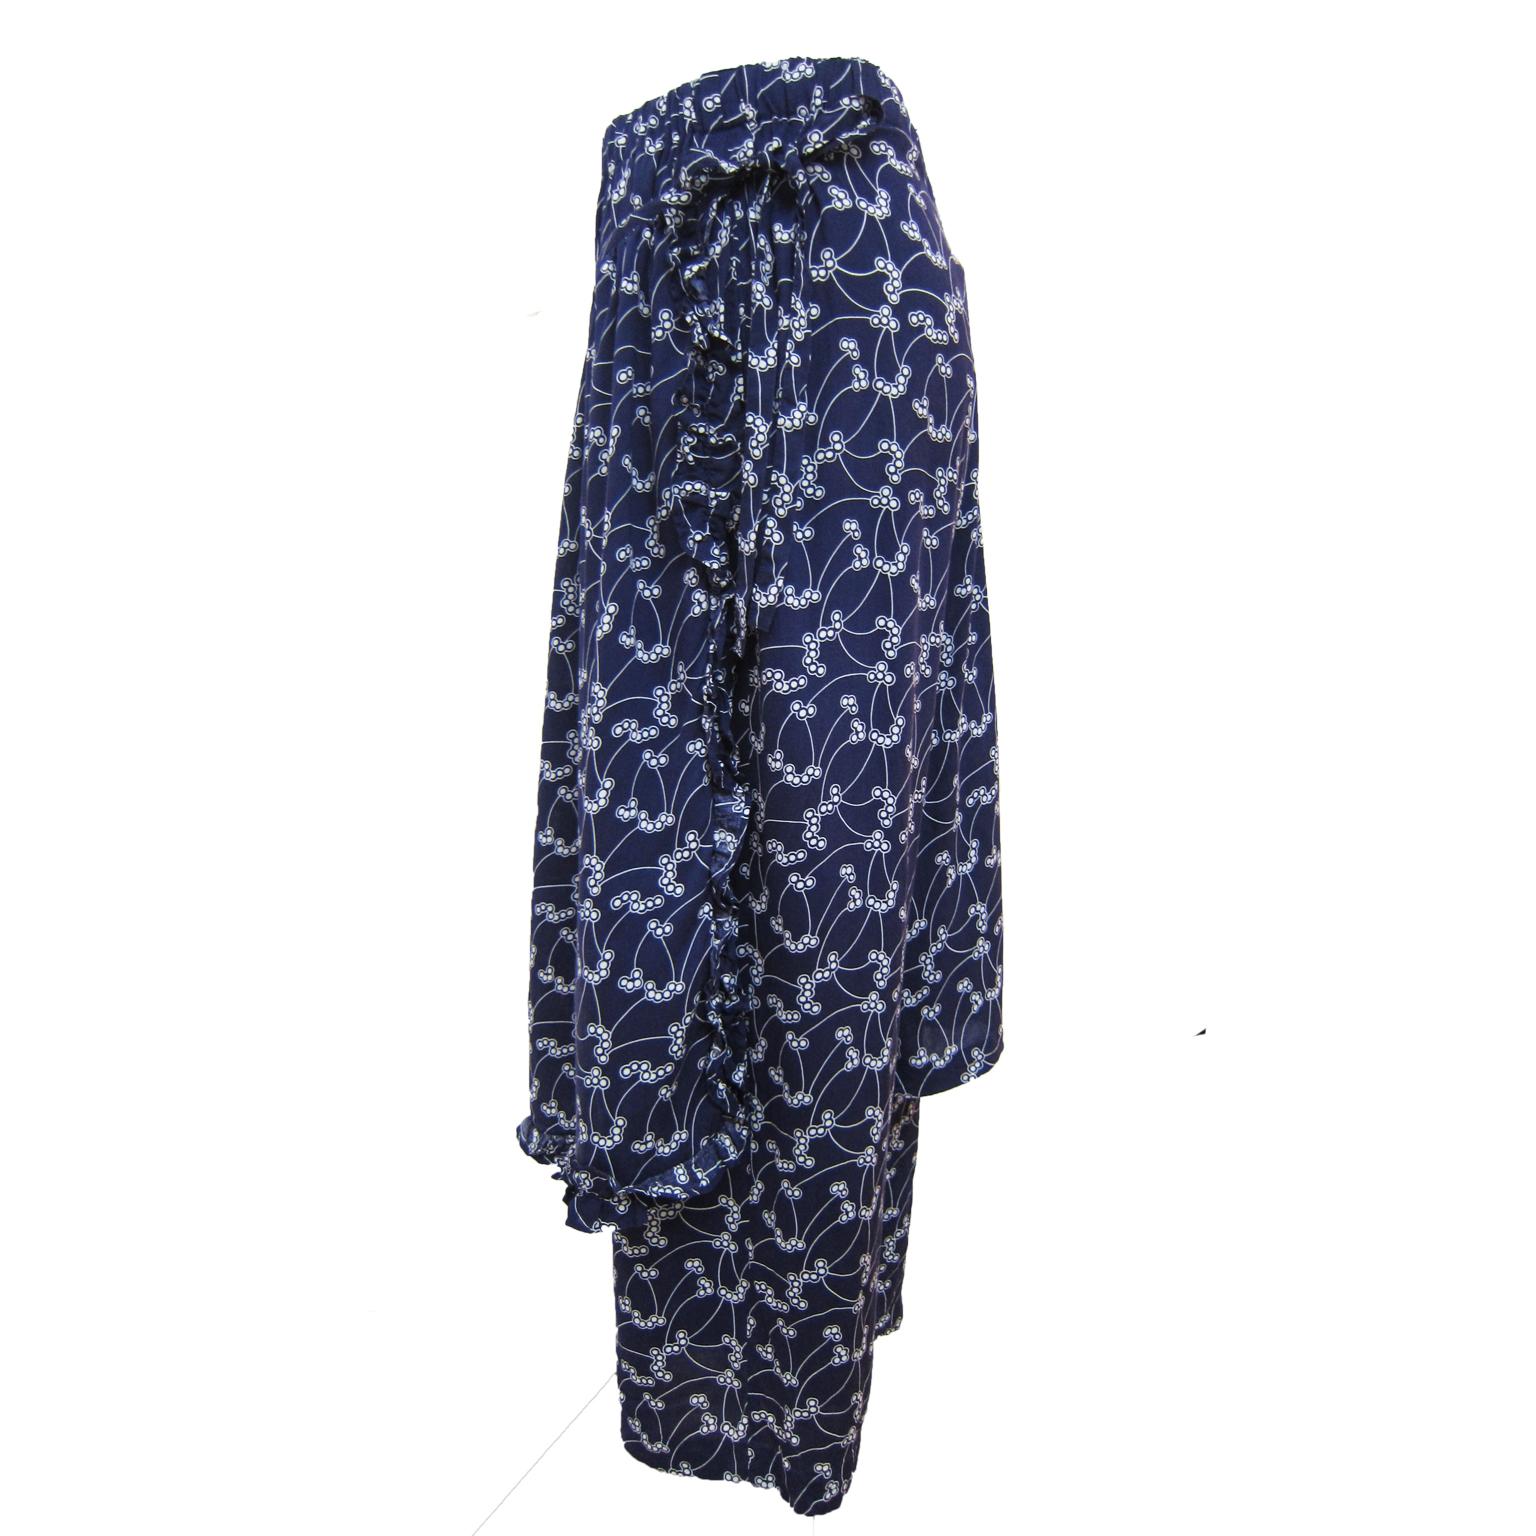 Comme des Garcons robe de chambre line trouser from AD 2001.
Elastic waist, half wrap apron like detail with ruffle - very interesting pattern cut of how the garment fall on body.
Size : M
